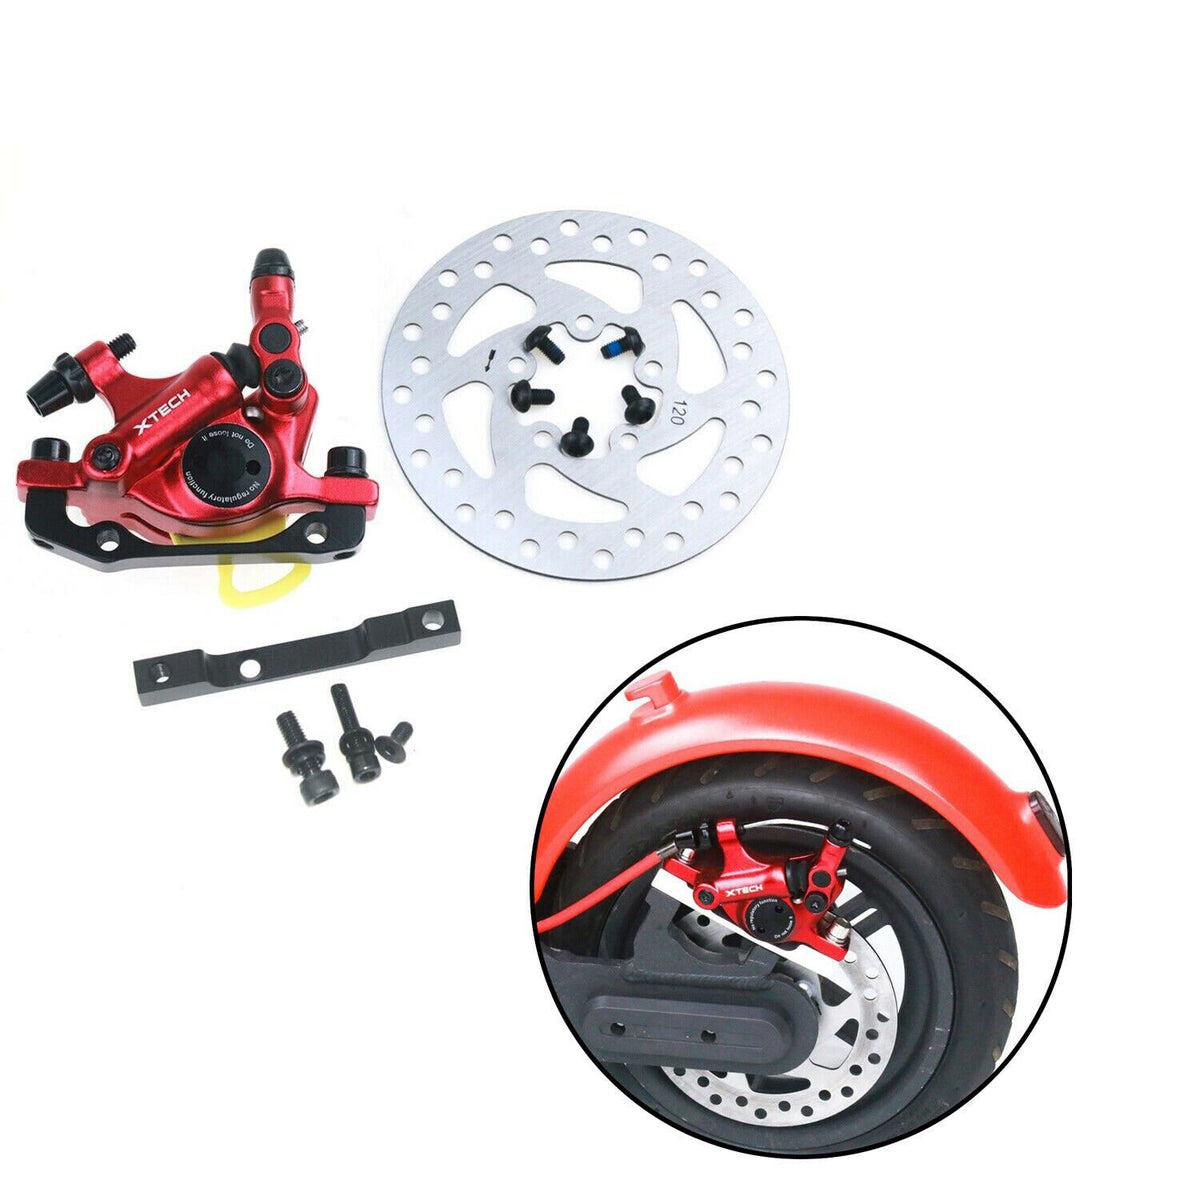 Xtech Upgraded Brake Kit for Xiaomi M365/Pro-Electric Scooters London